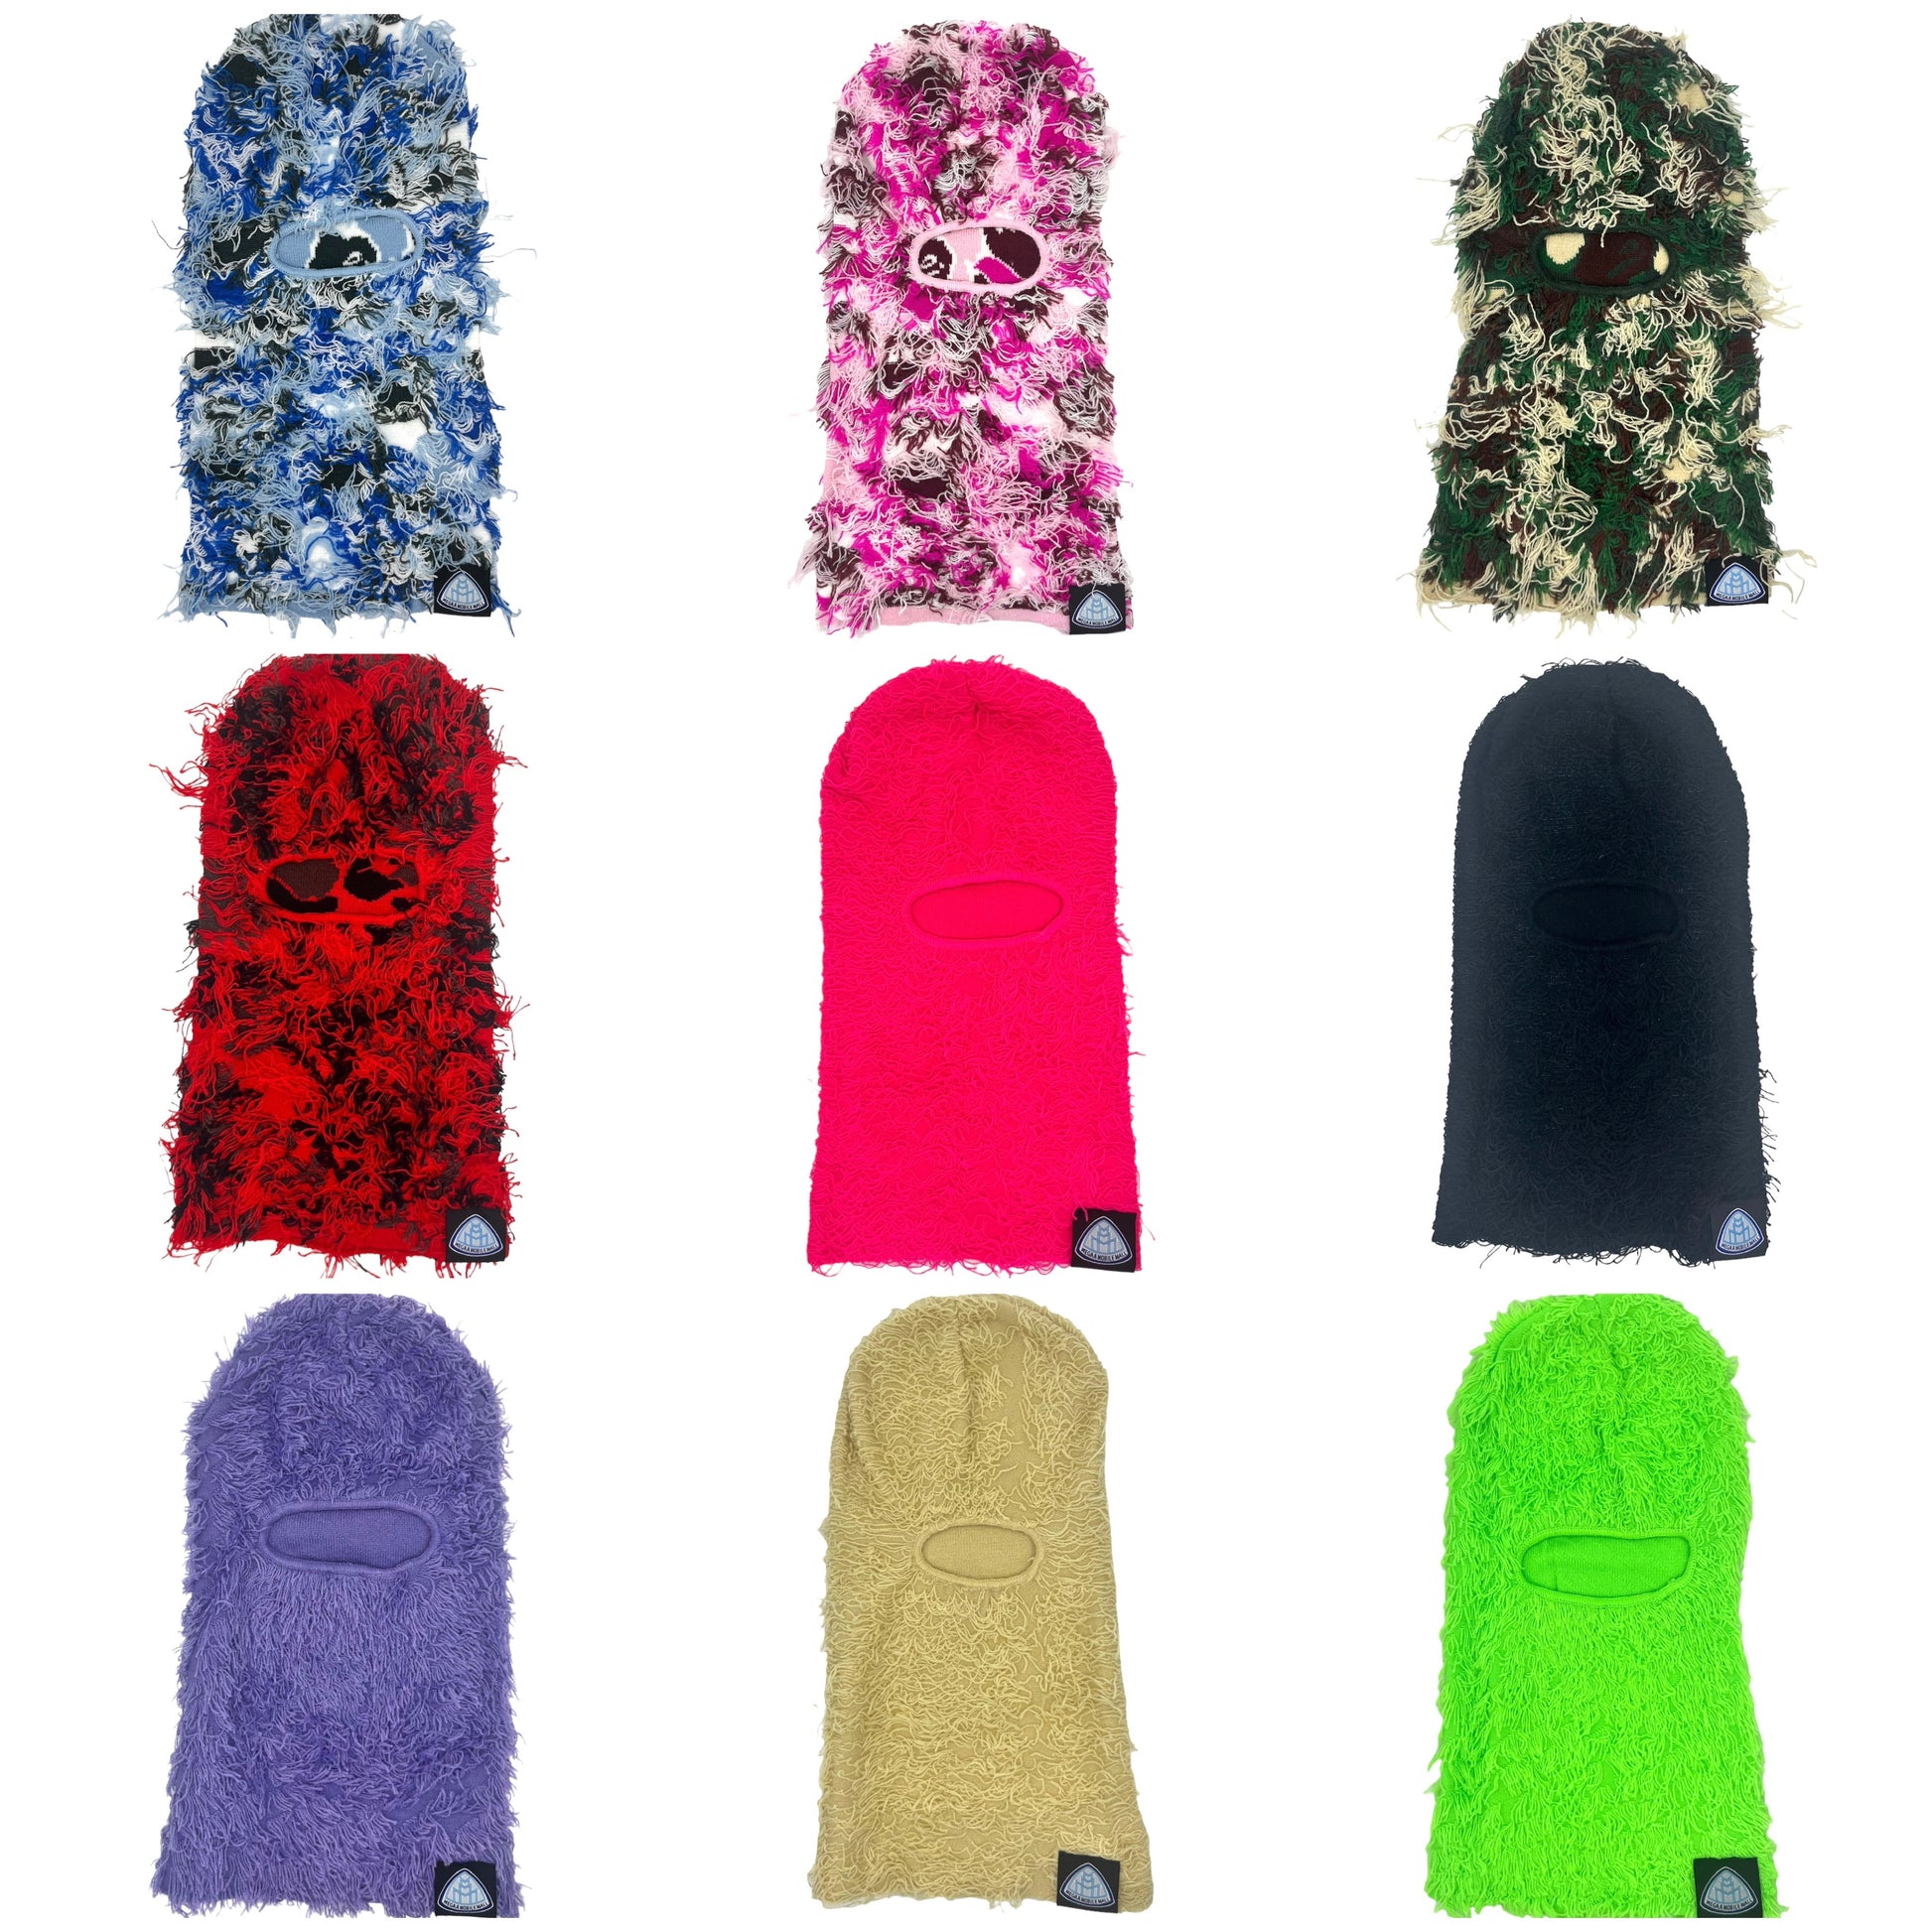 distressed ski mask 9 colors available